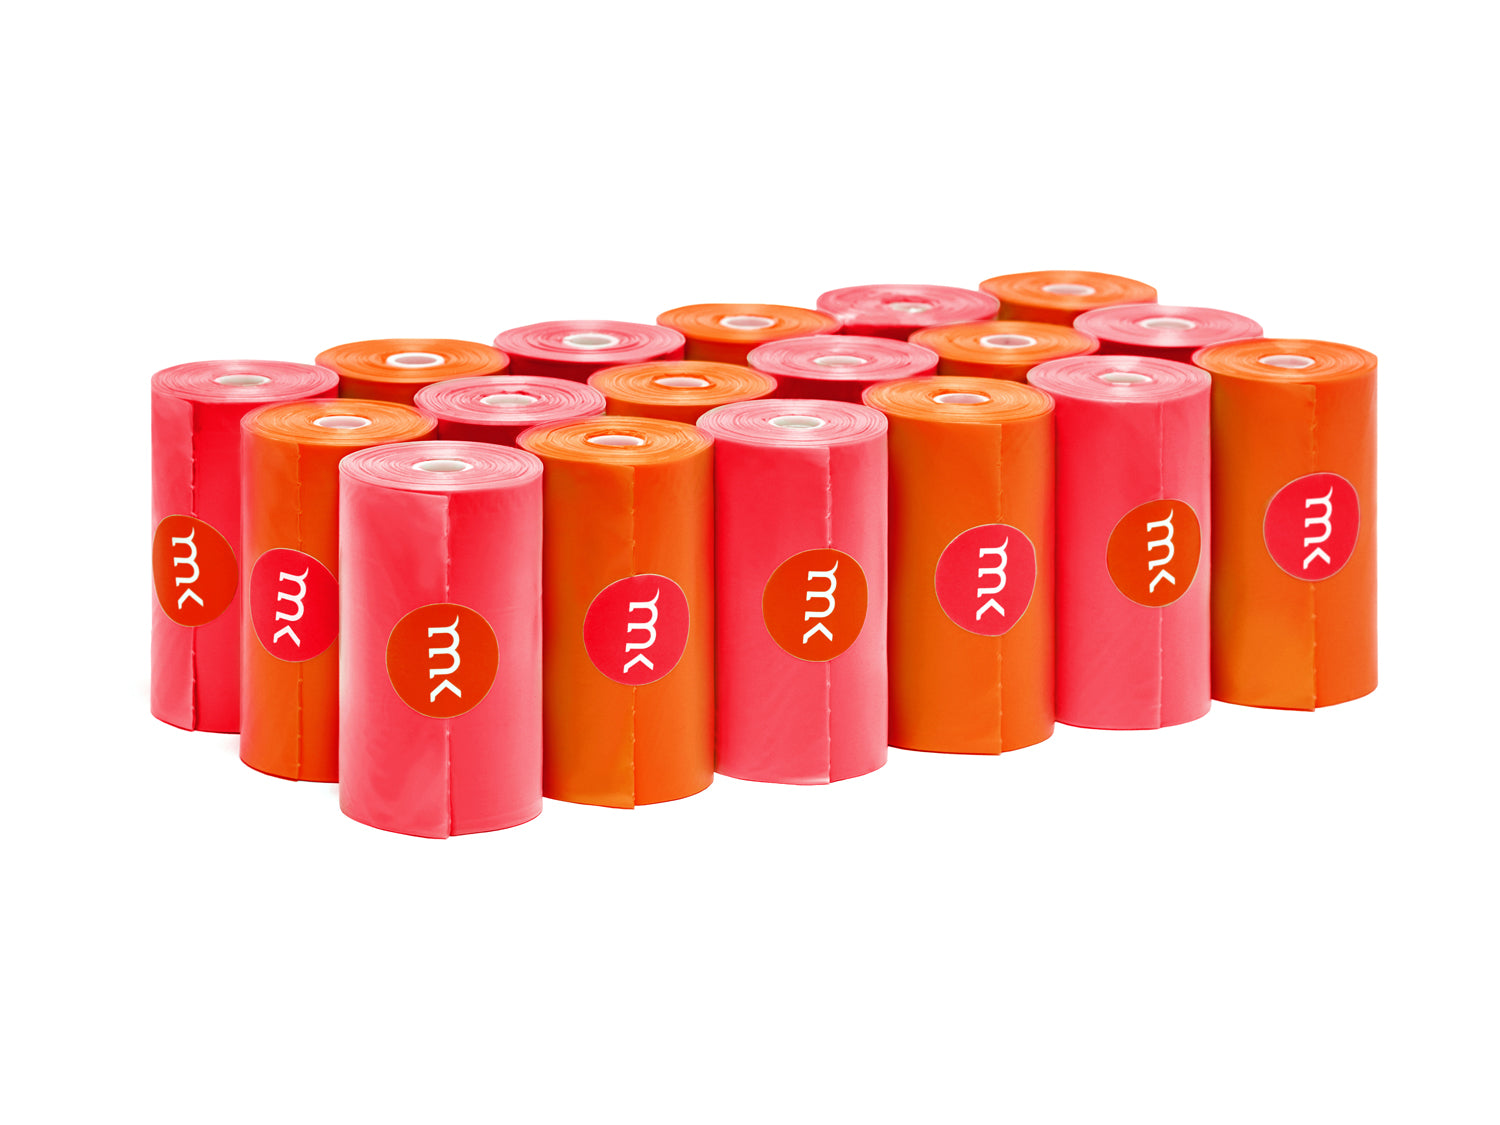 400-Count Modern Kanine® Dog Waste Bags, with 20 refill rolls and 2 Dispensers in Orange Coral